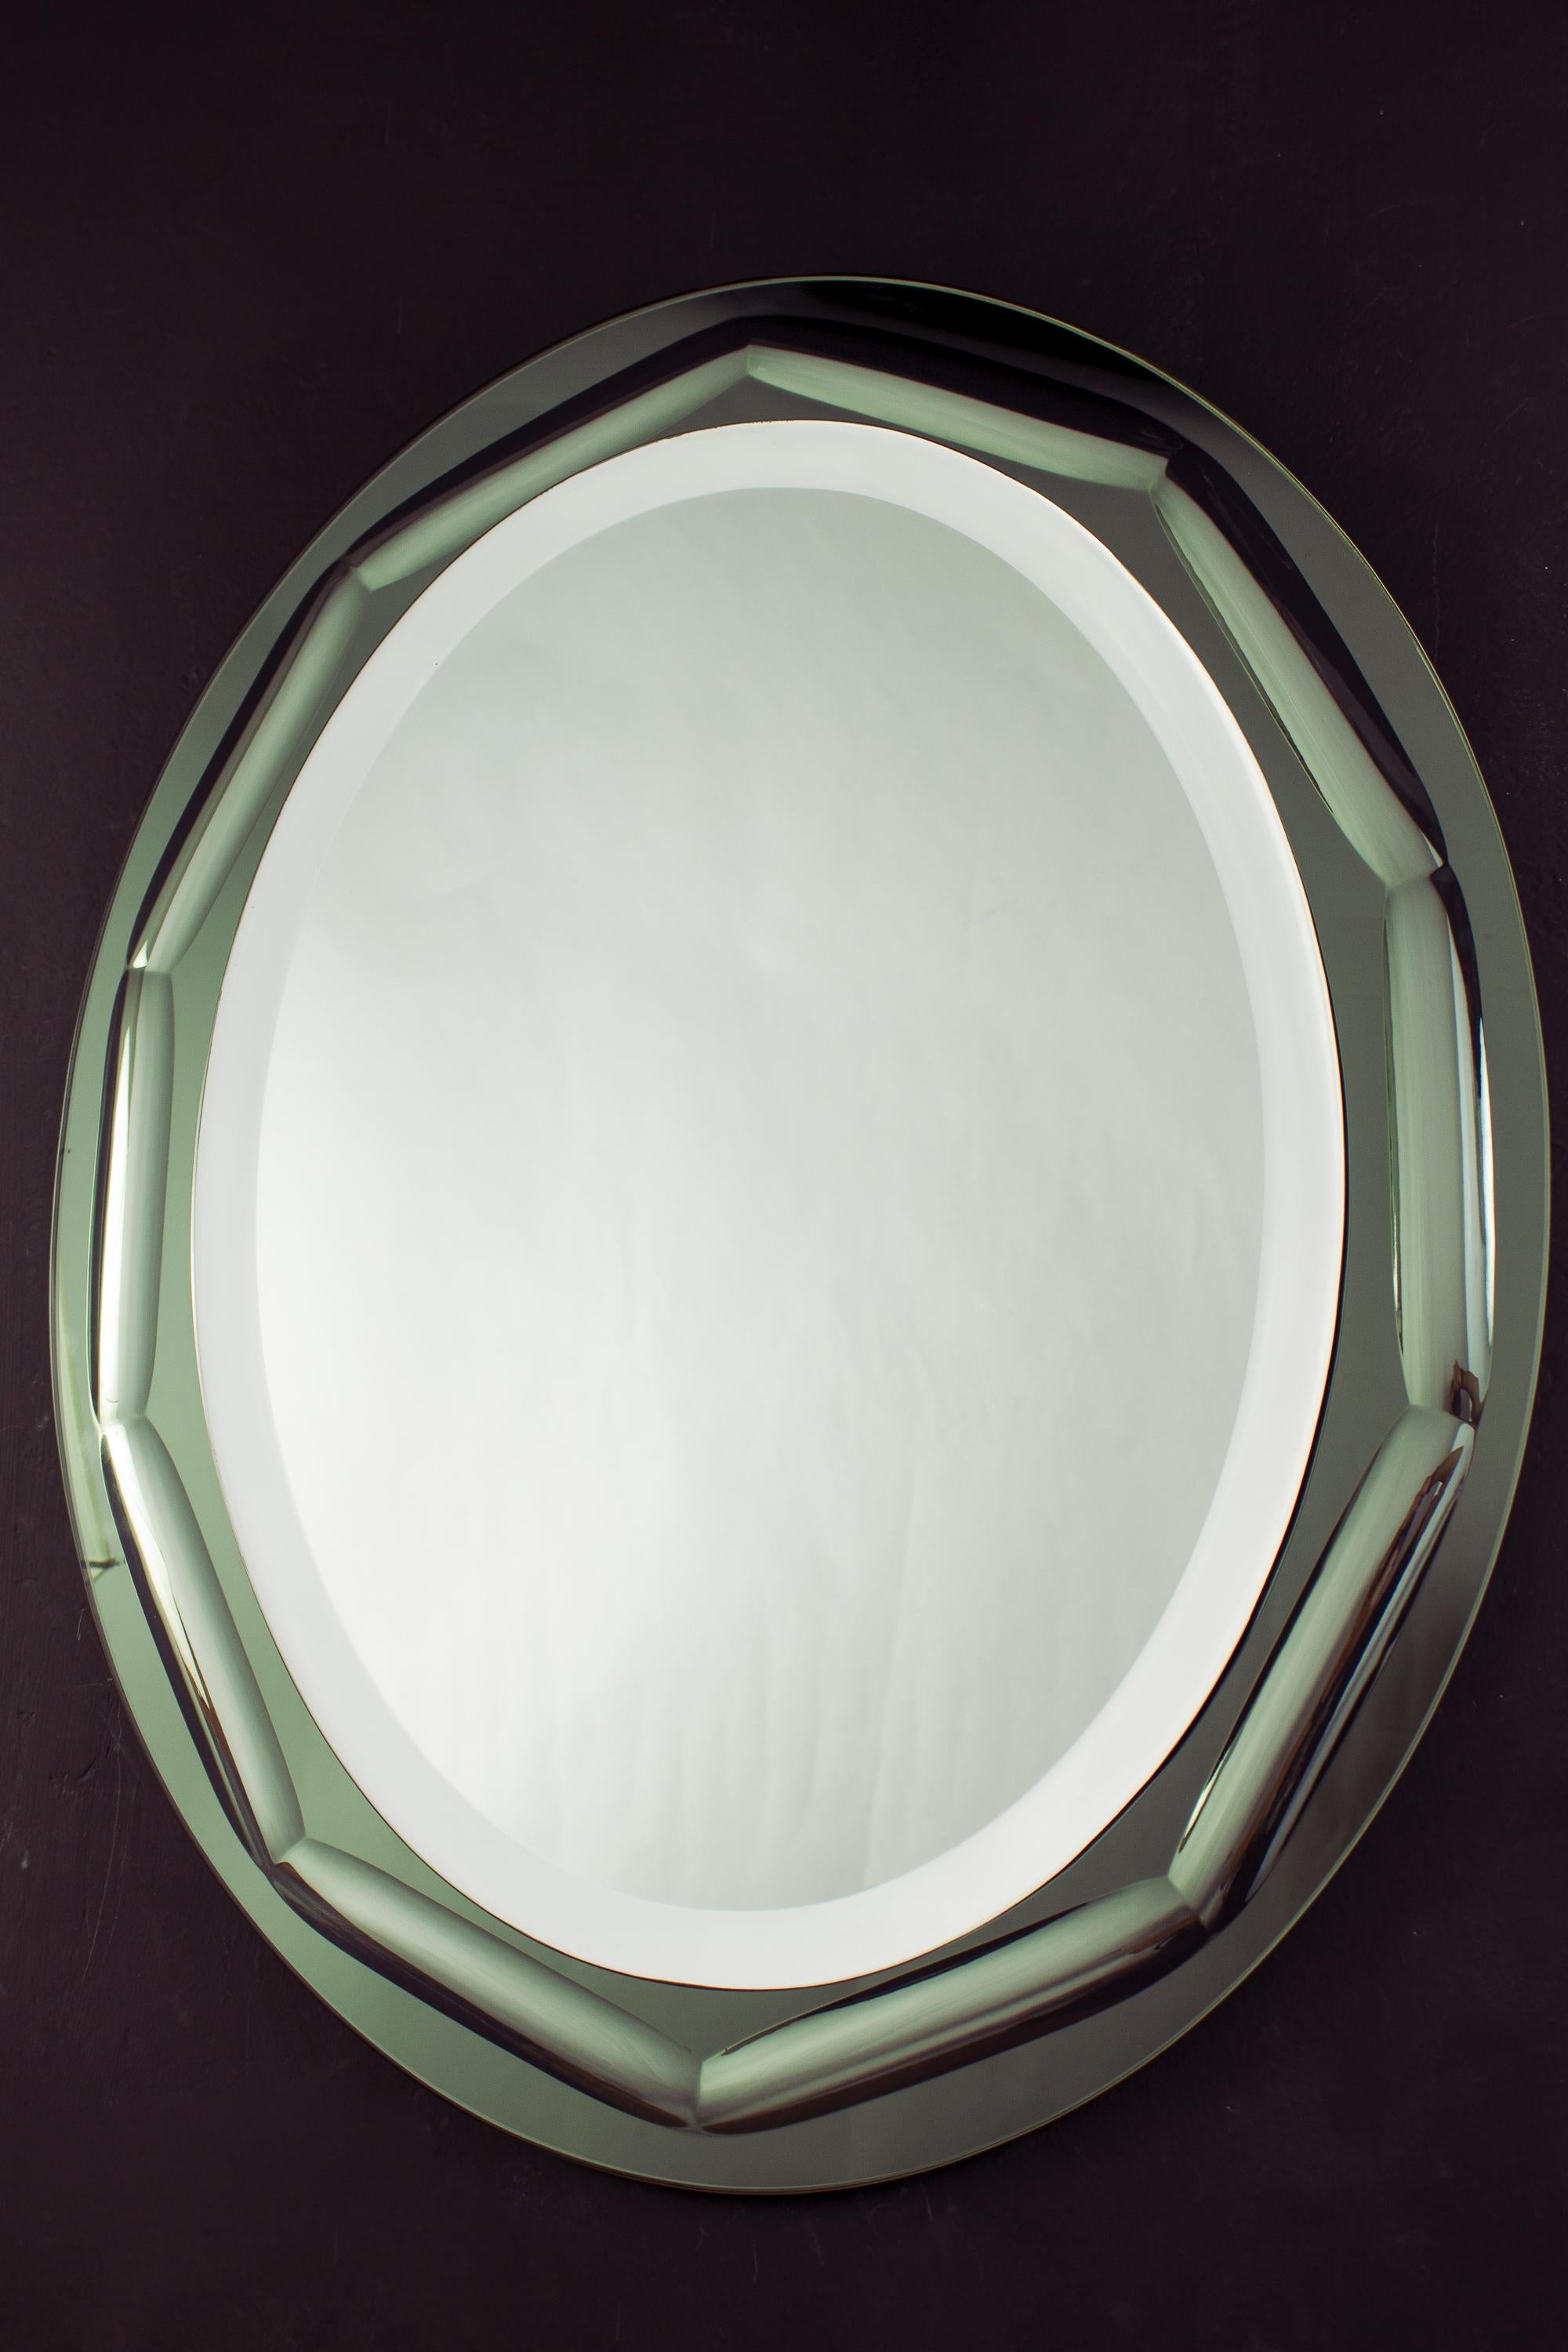 Italian oval shaped mirror in the style of Fontana Arte. The mirror is in green colored glass.